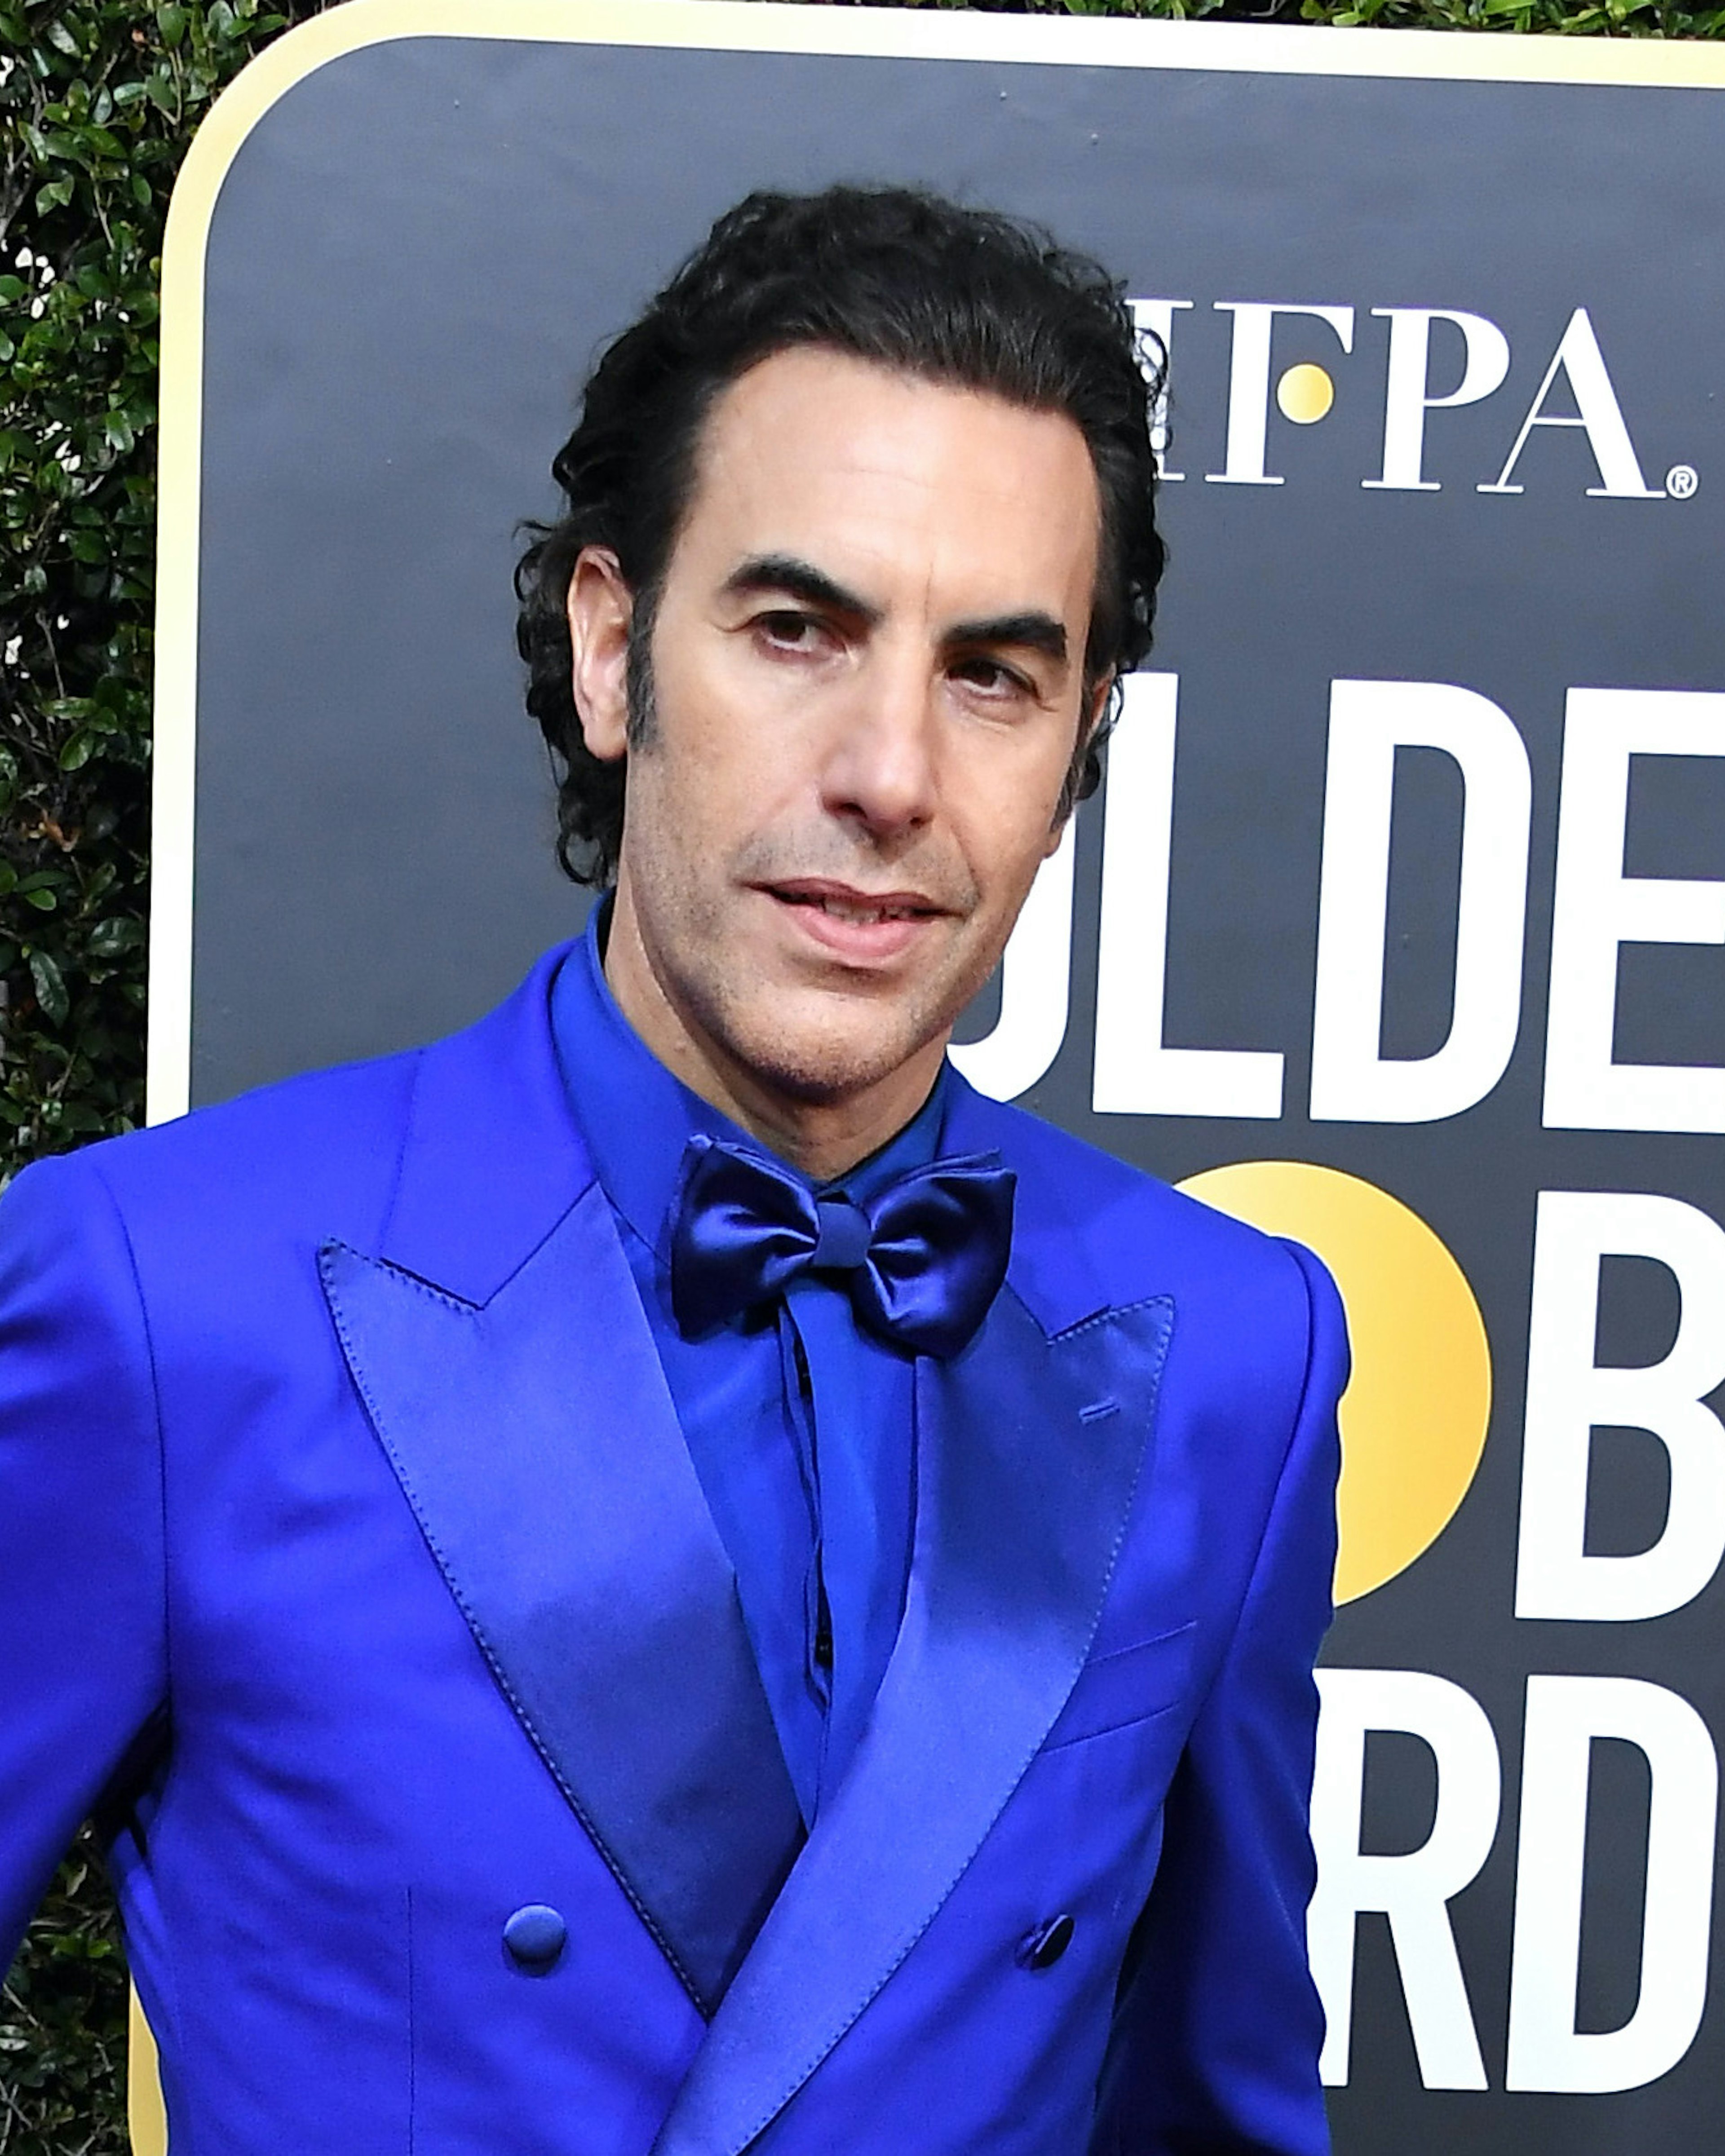 Sacha Baron Cohen arrives at the 77th Annual Golden Globe Awards attends the 77th Annual Golden Globe Awards at The Beverly Hilton Hotel on January 05, 2020 in Beverly Hills, California. (Photo by Steve Granitz/WireImage)